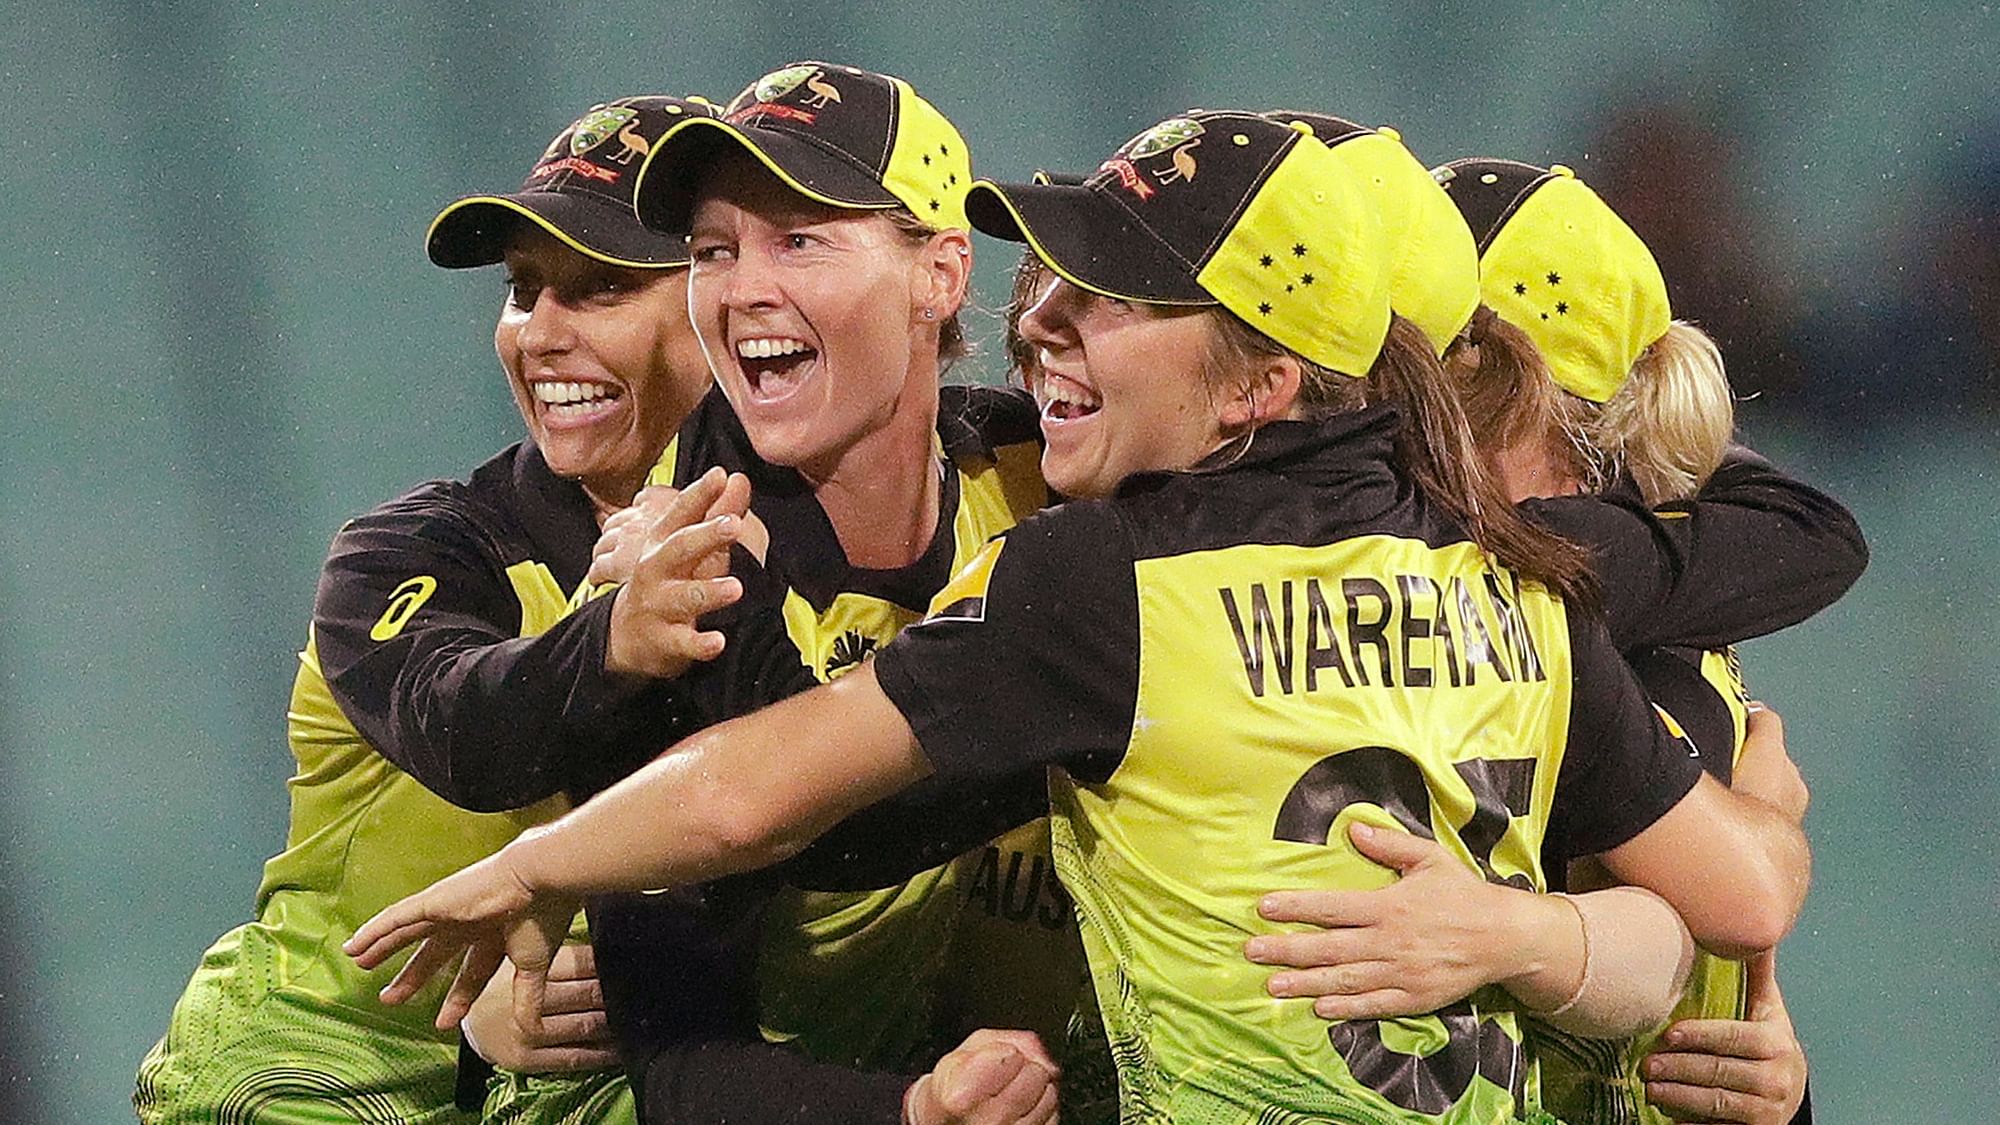 Cricket Australia’s efforts to support women’s cricket and the cricketers is a lesson for all other cricket boards.